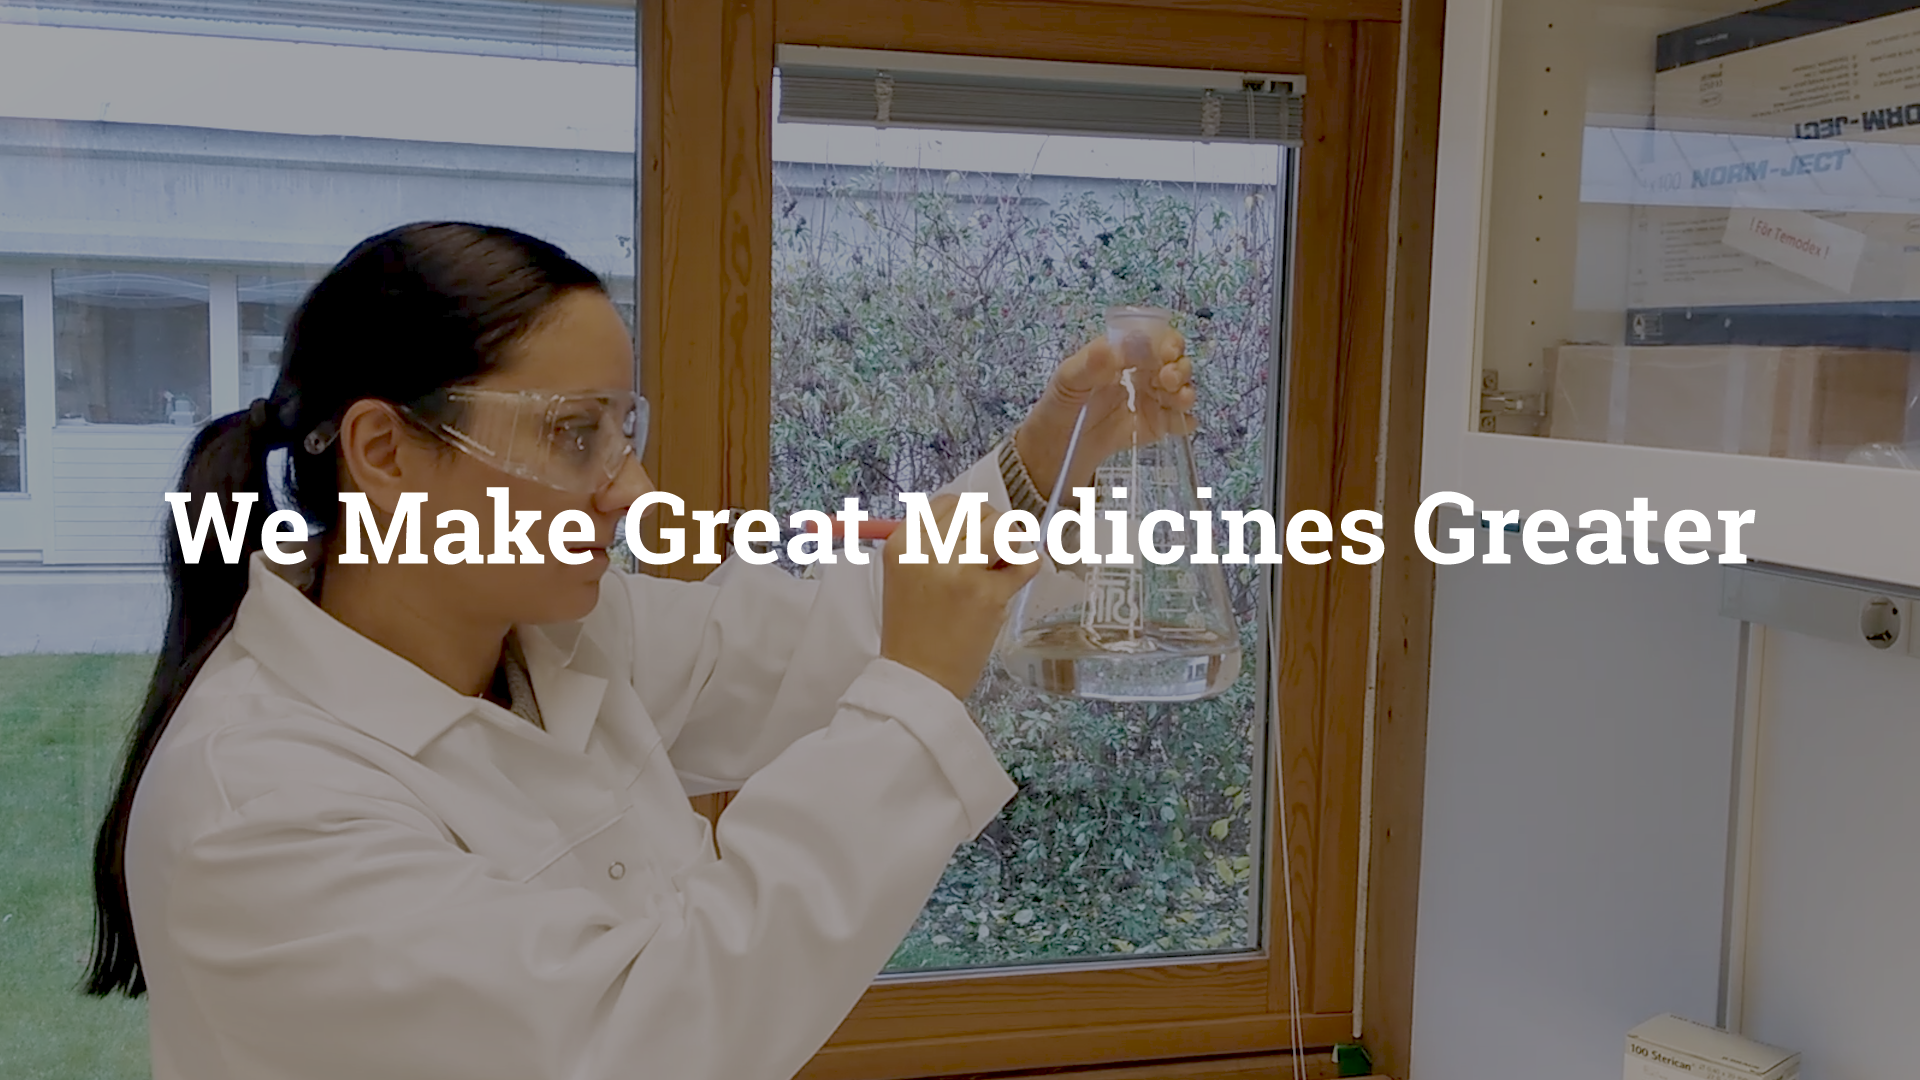 This is the lab of Double Bond Pharmaceutical in Uppsala. The slogan of the company - we make great medicines greater - is shown in the image.